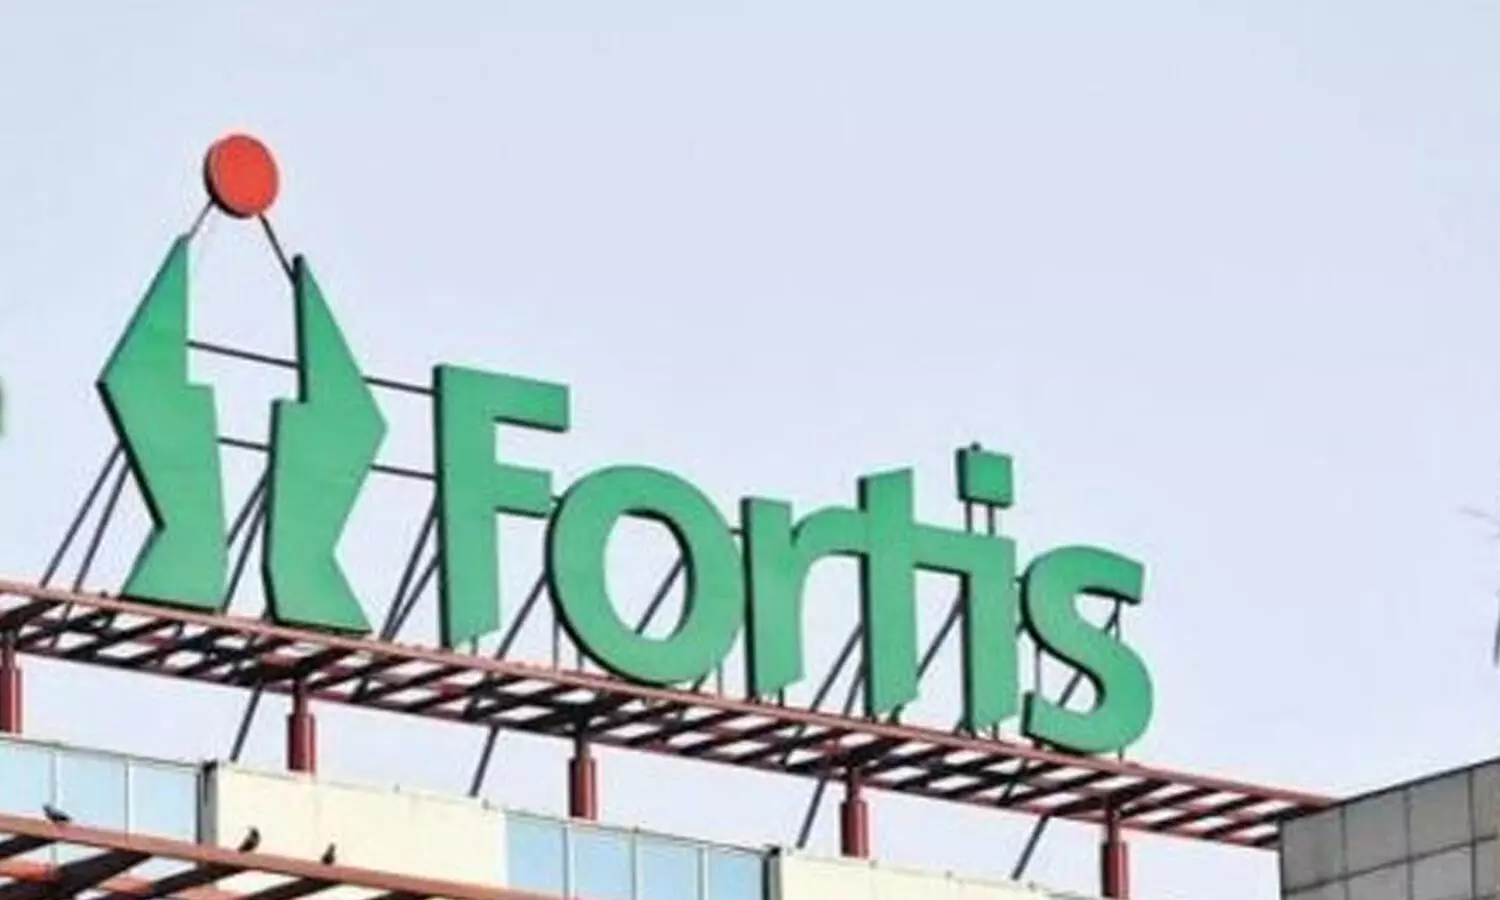 Fortis gets a new name in PARKWAY, to dissassociate with former promoters controversy